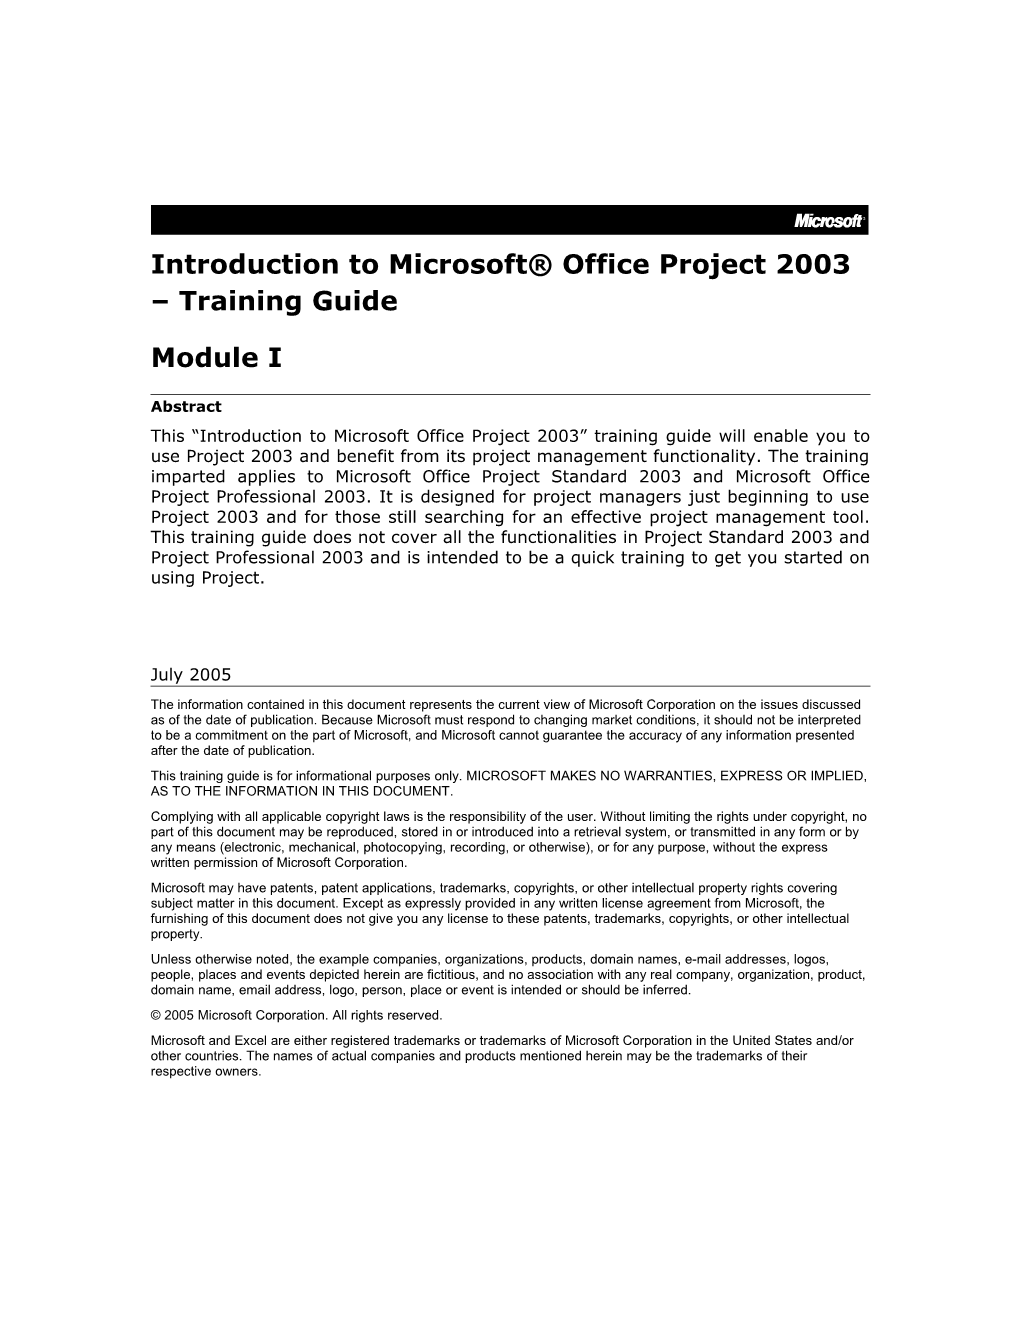 Introduction Tomicrosoft Office Project 2003 Training Guide